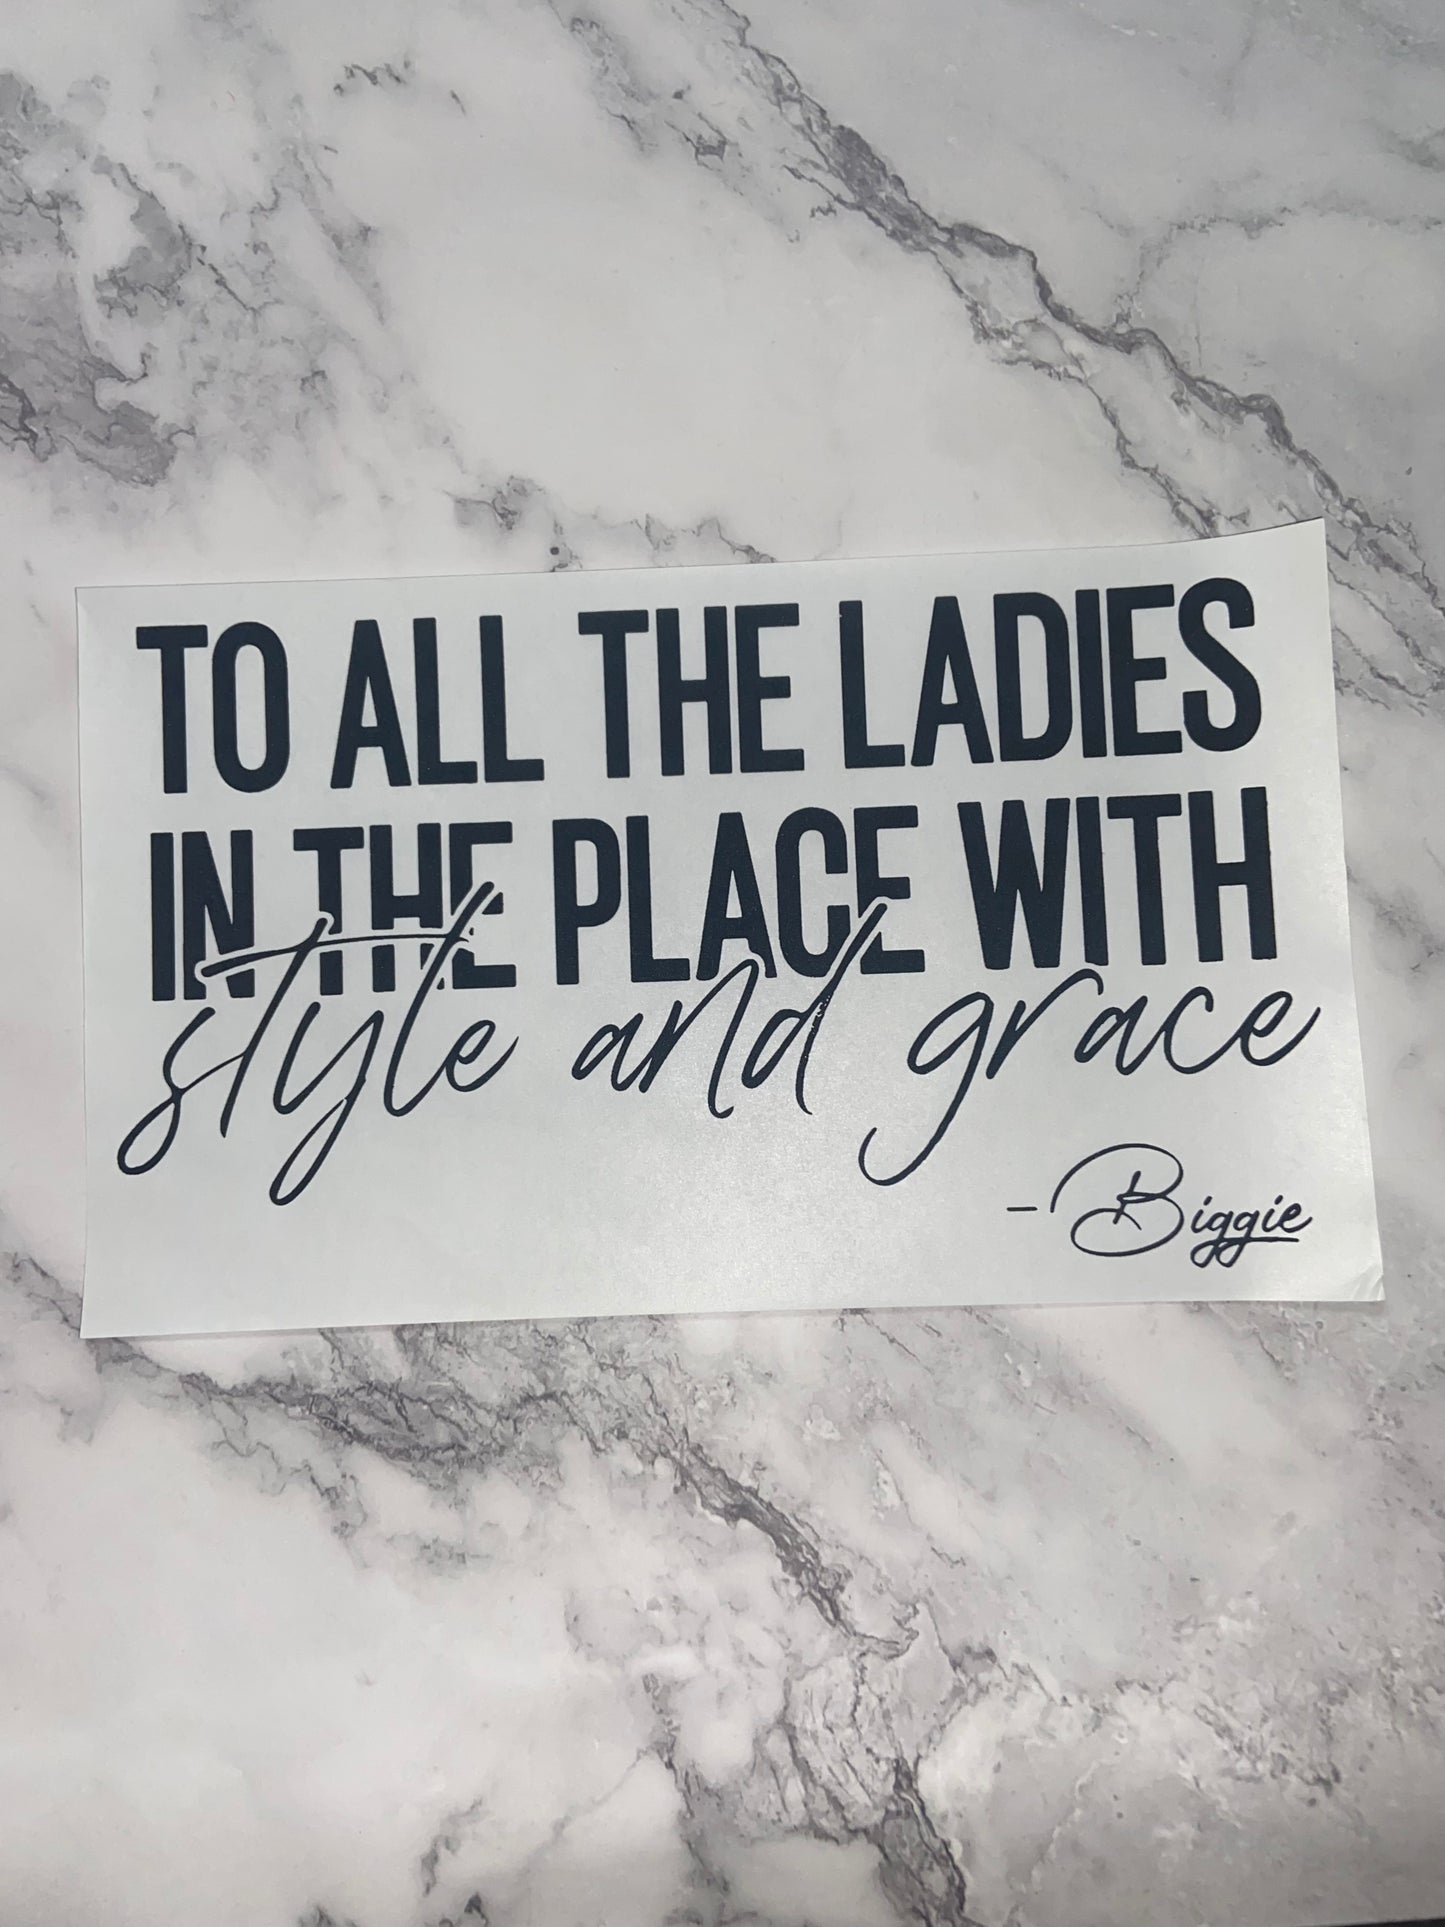 To all the ladies in the place print